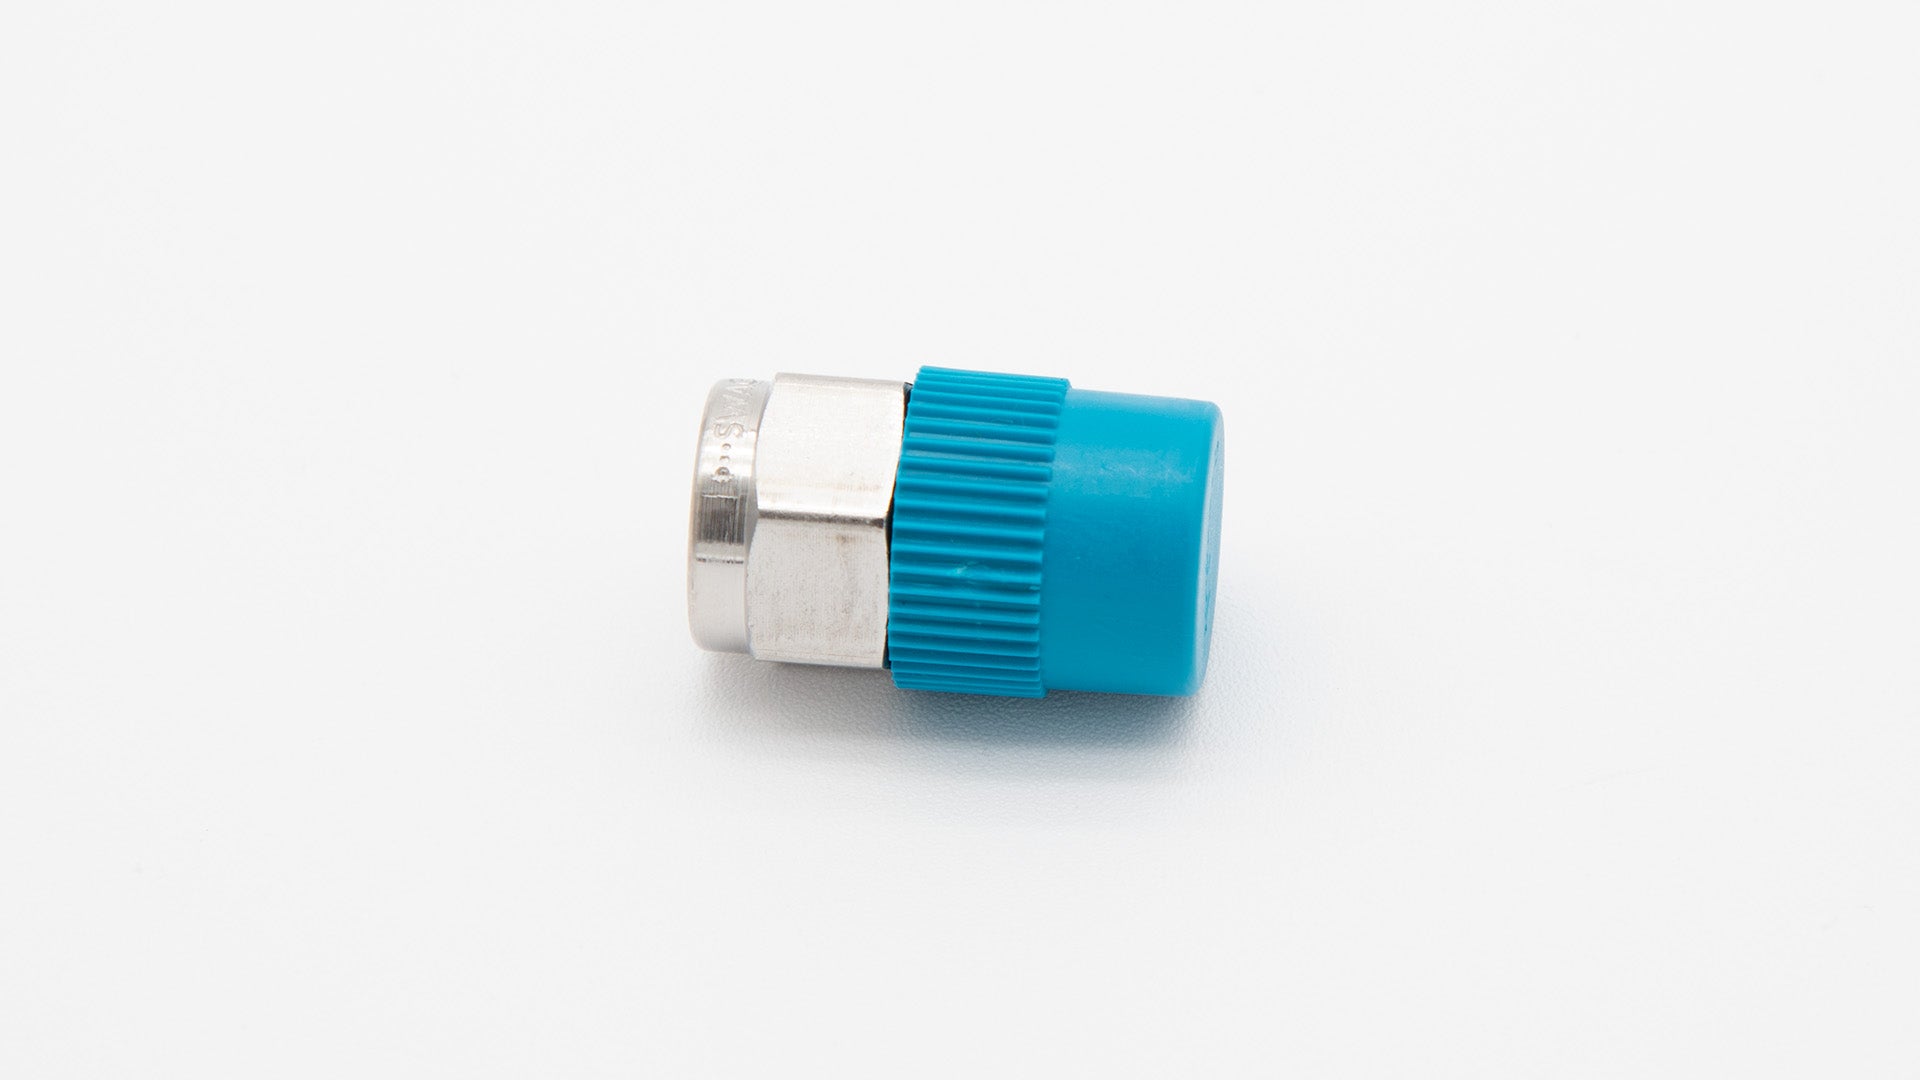 Stainless steel pipe plug with plastic cap